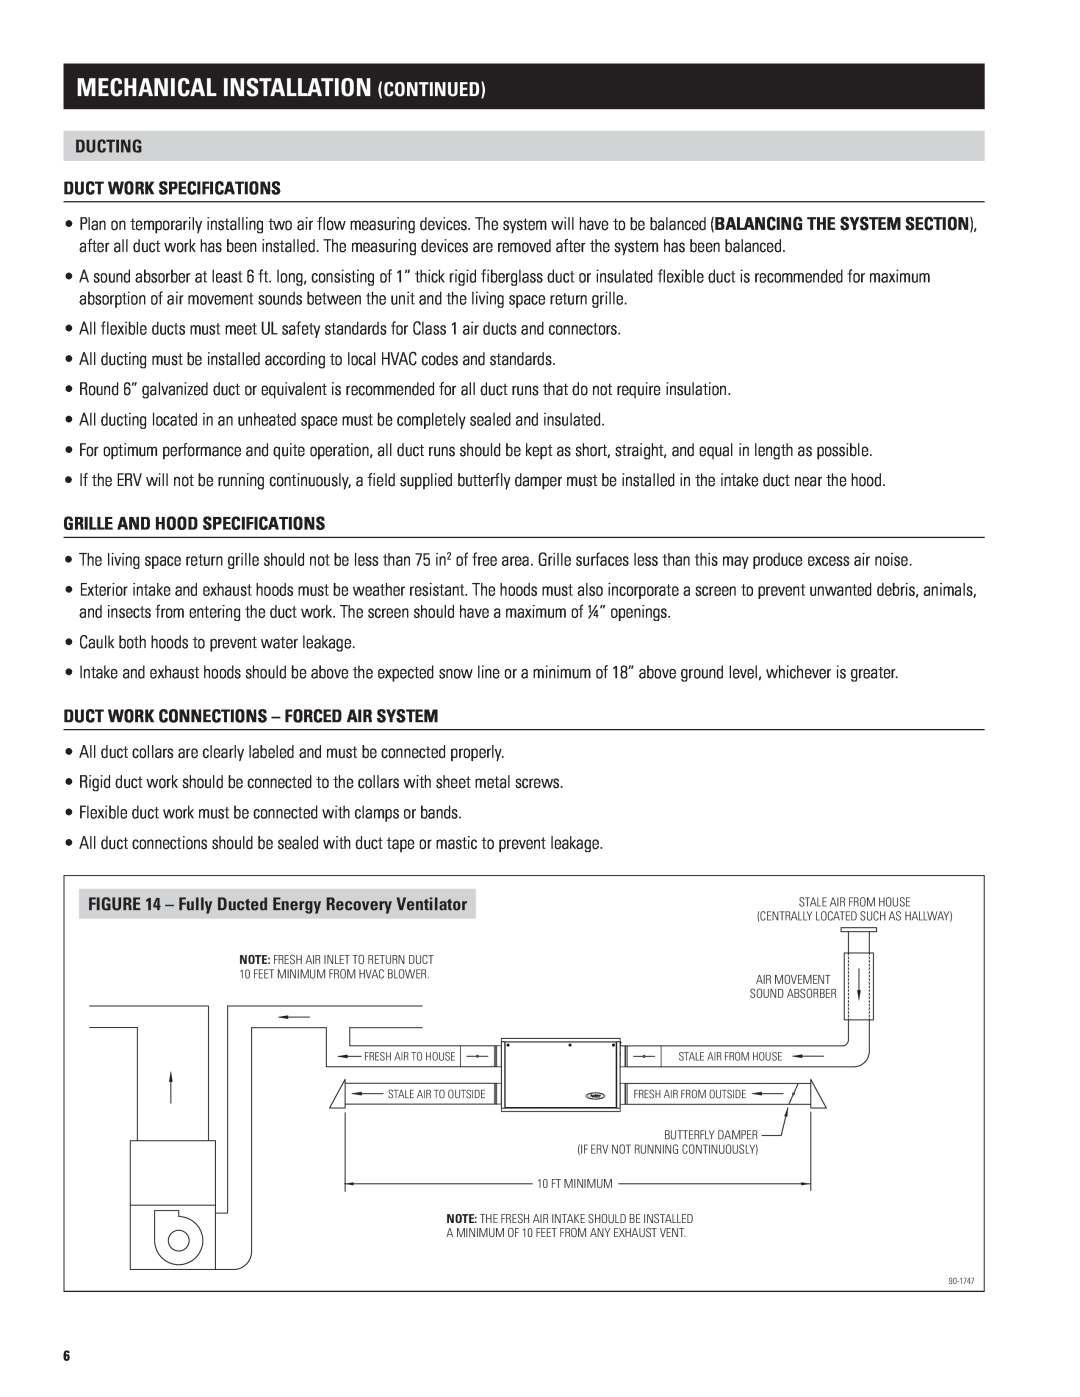 Aprilaire 8100 DUCTING Duct work Specifications, GrillE and Hood Specifications, Duct work Connections - ForceD Air System 